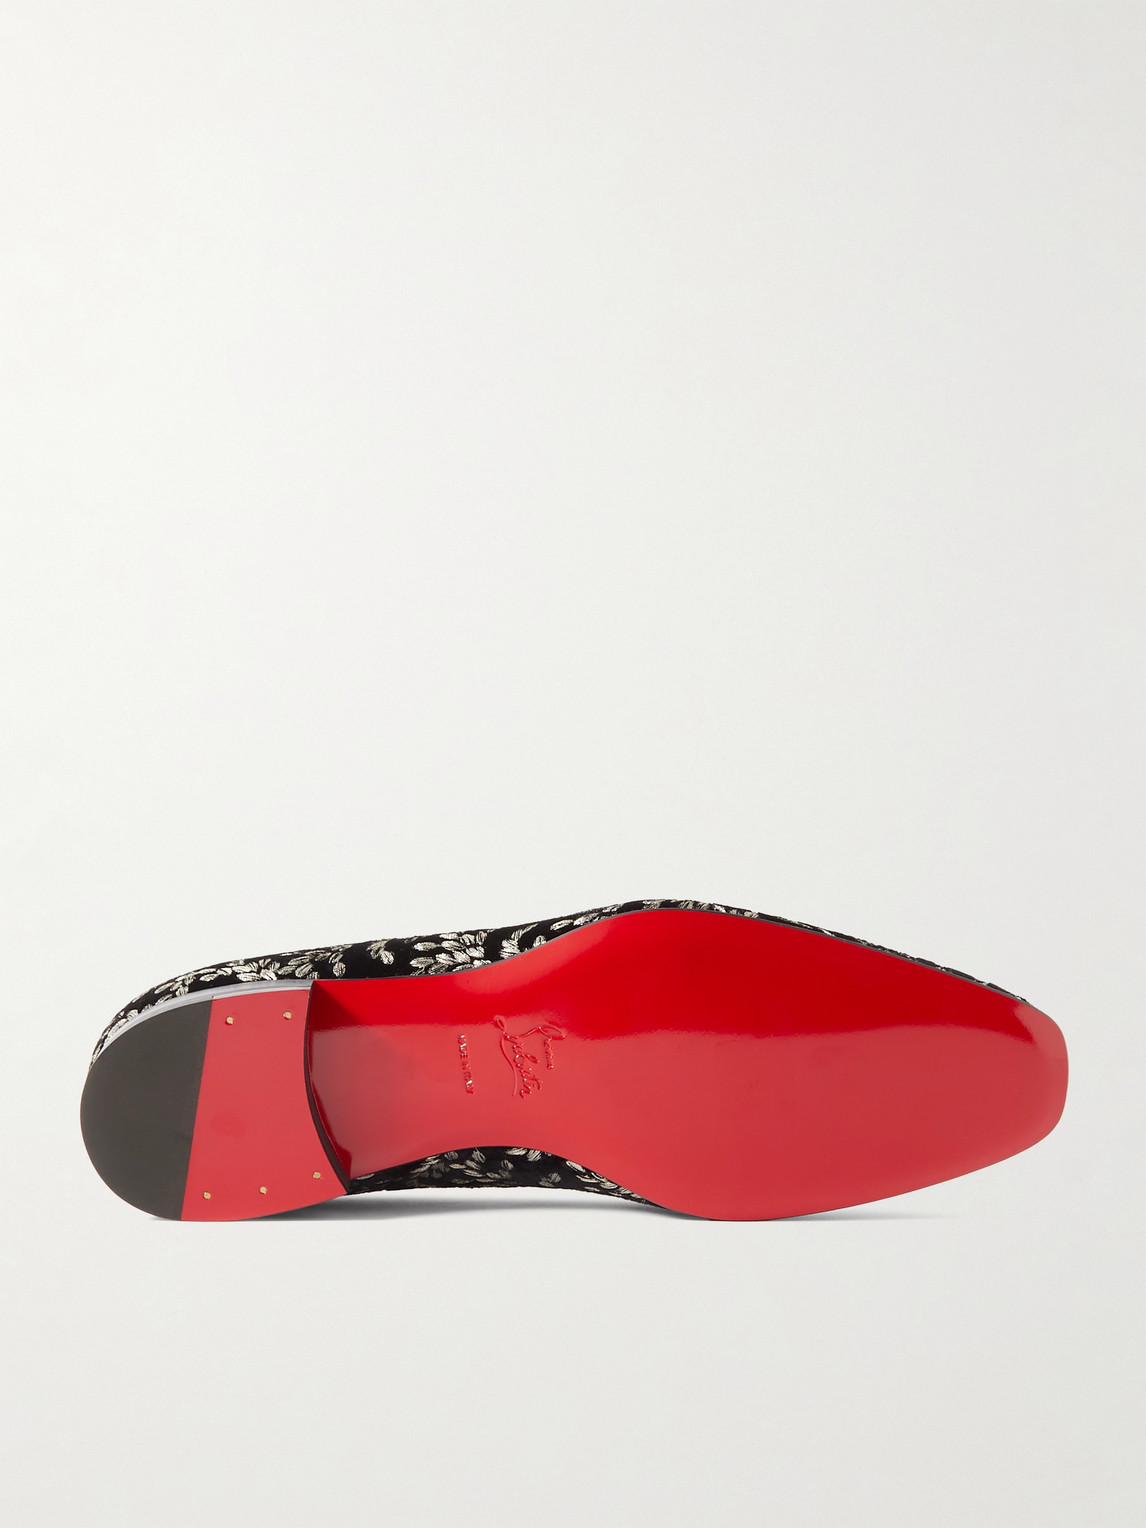 Shop Christian Louboutin Dandy Chick Grosgrain-trimmed Embroidered Velour Loafers In Black